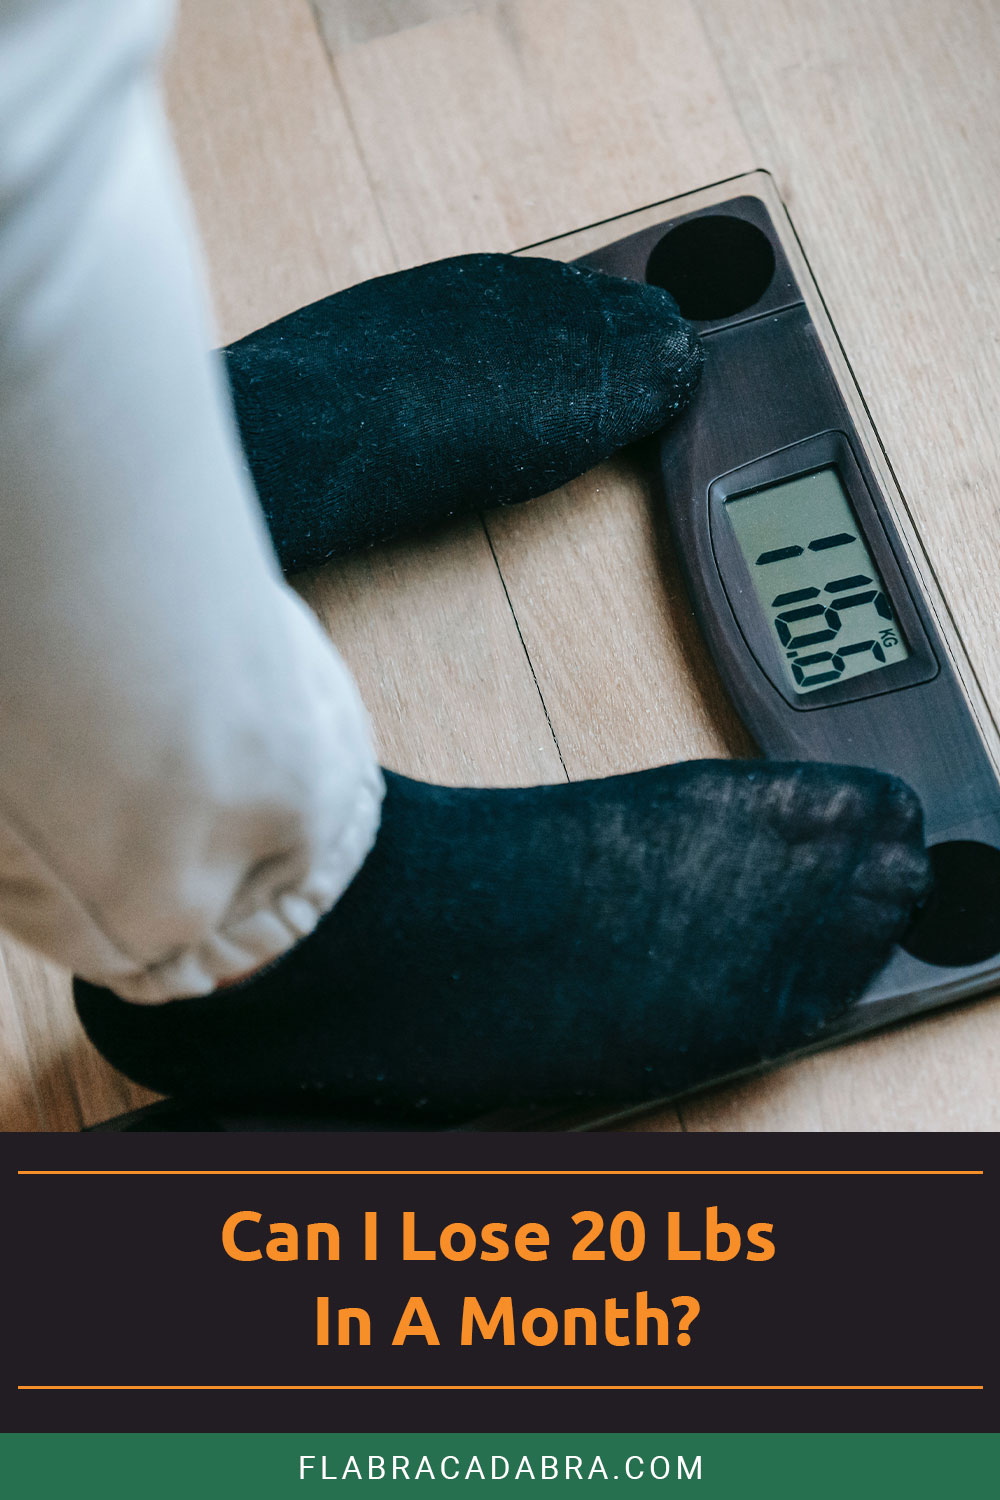 Can I Lose 20 Lbs In A Month?